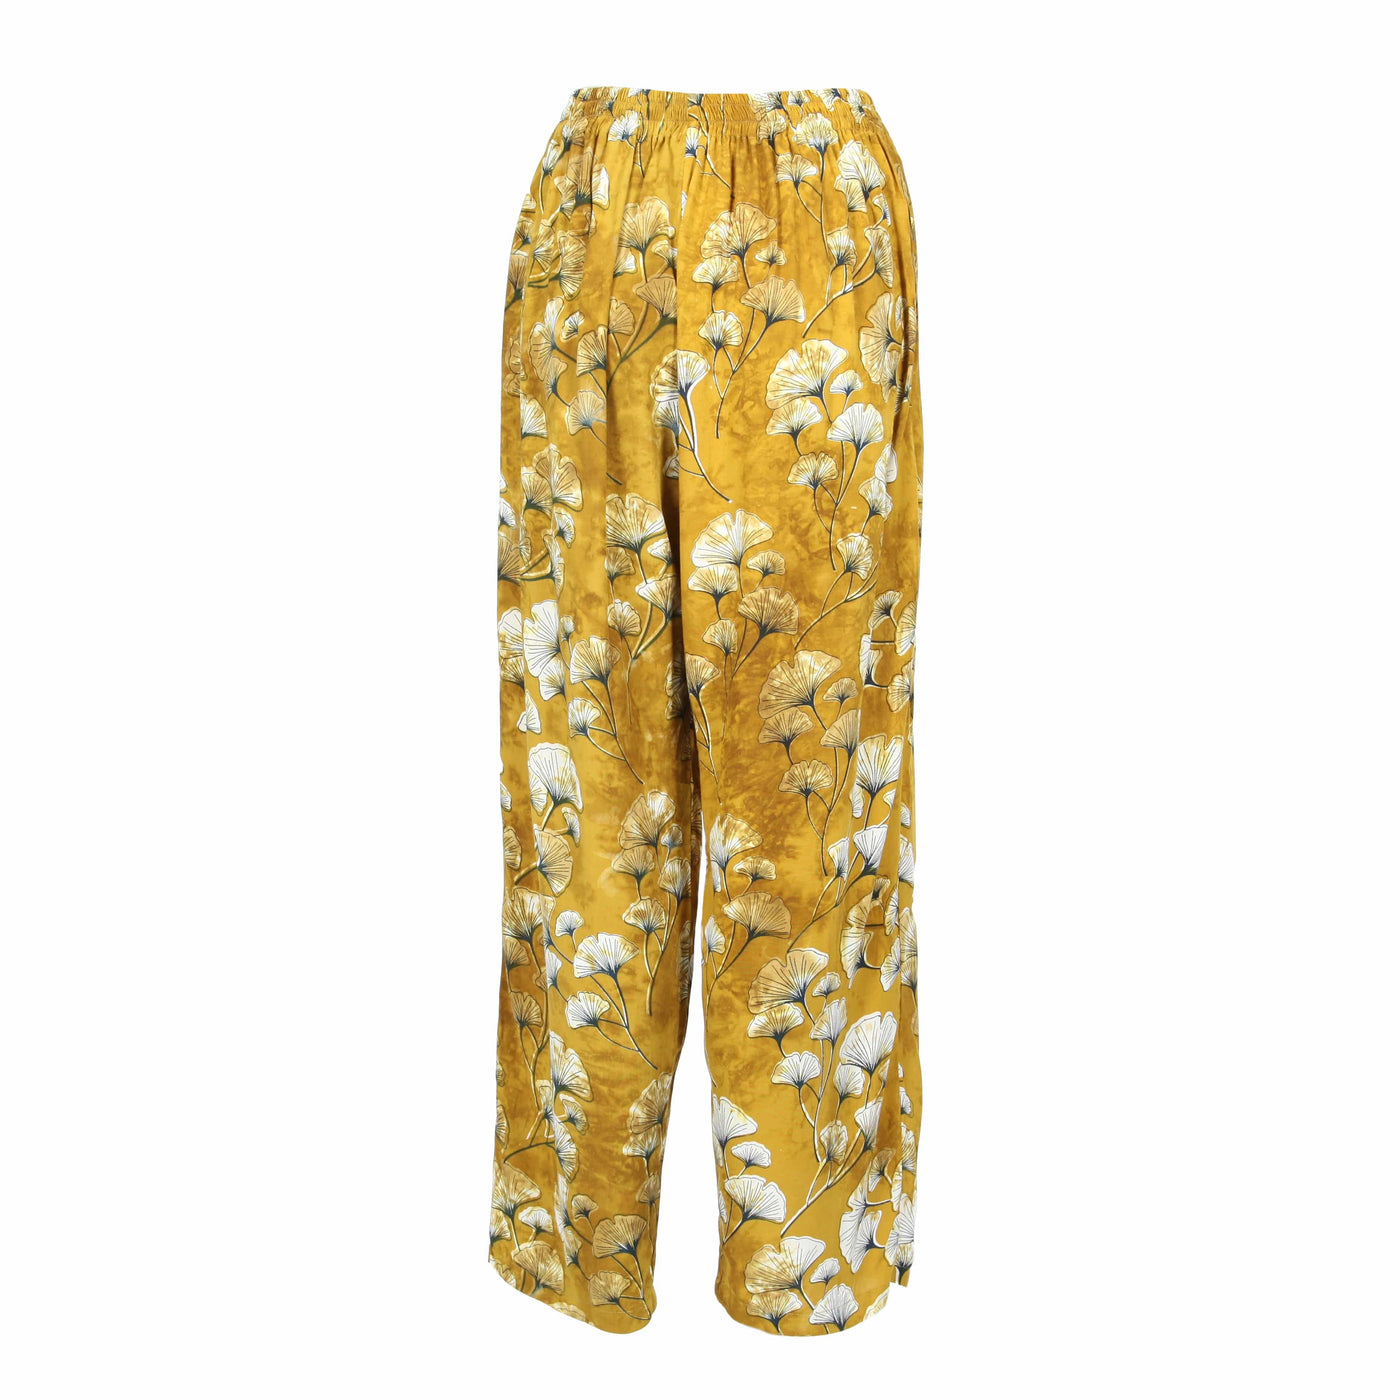 Mustard Floral Print Trousers